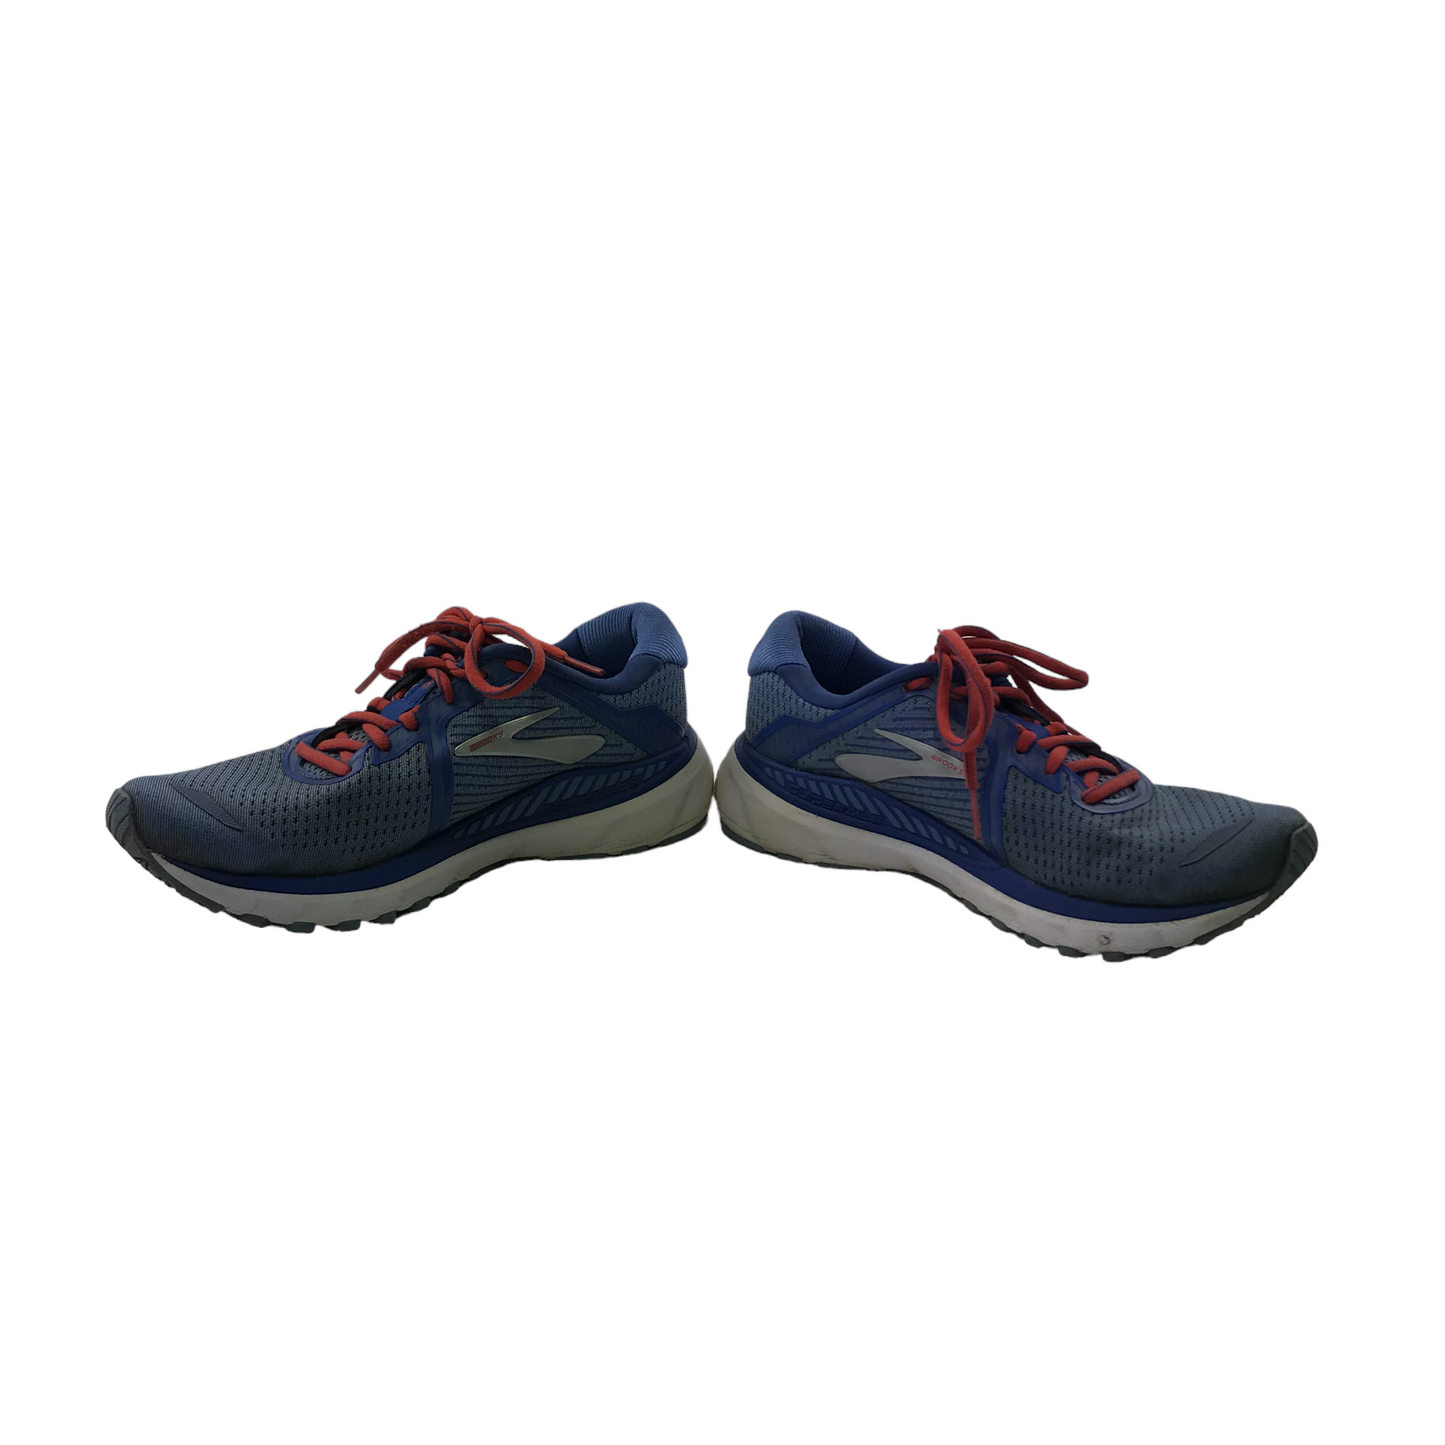 Brooks Blue Running Trainers Shoe Size 6